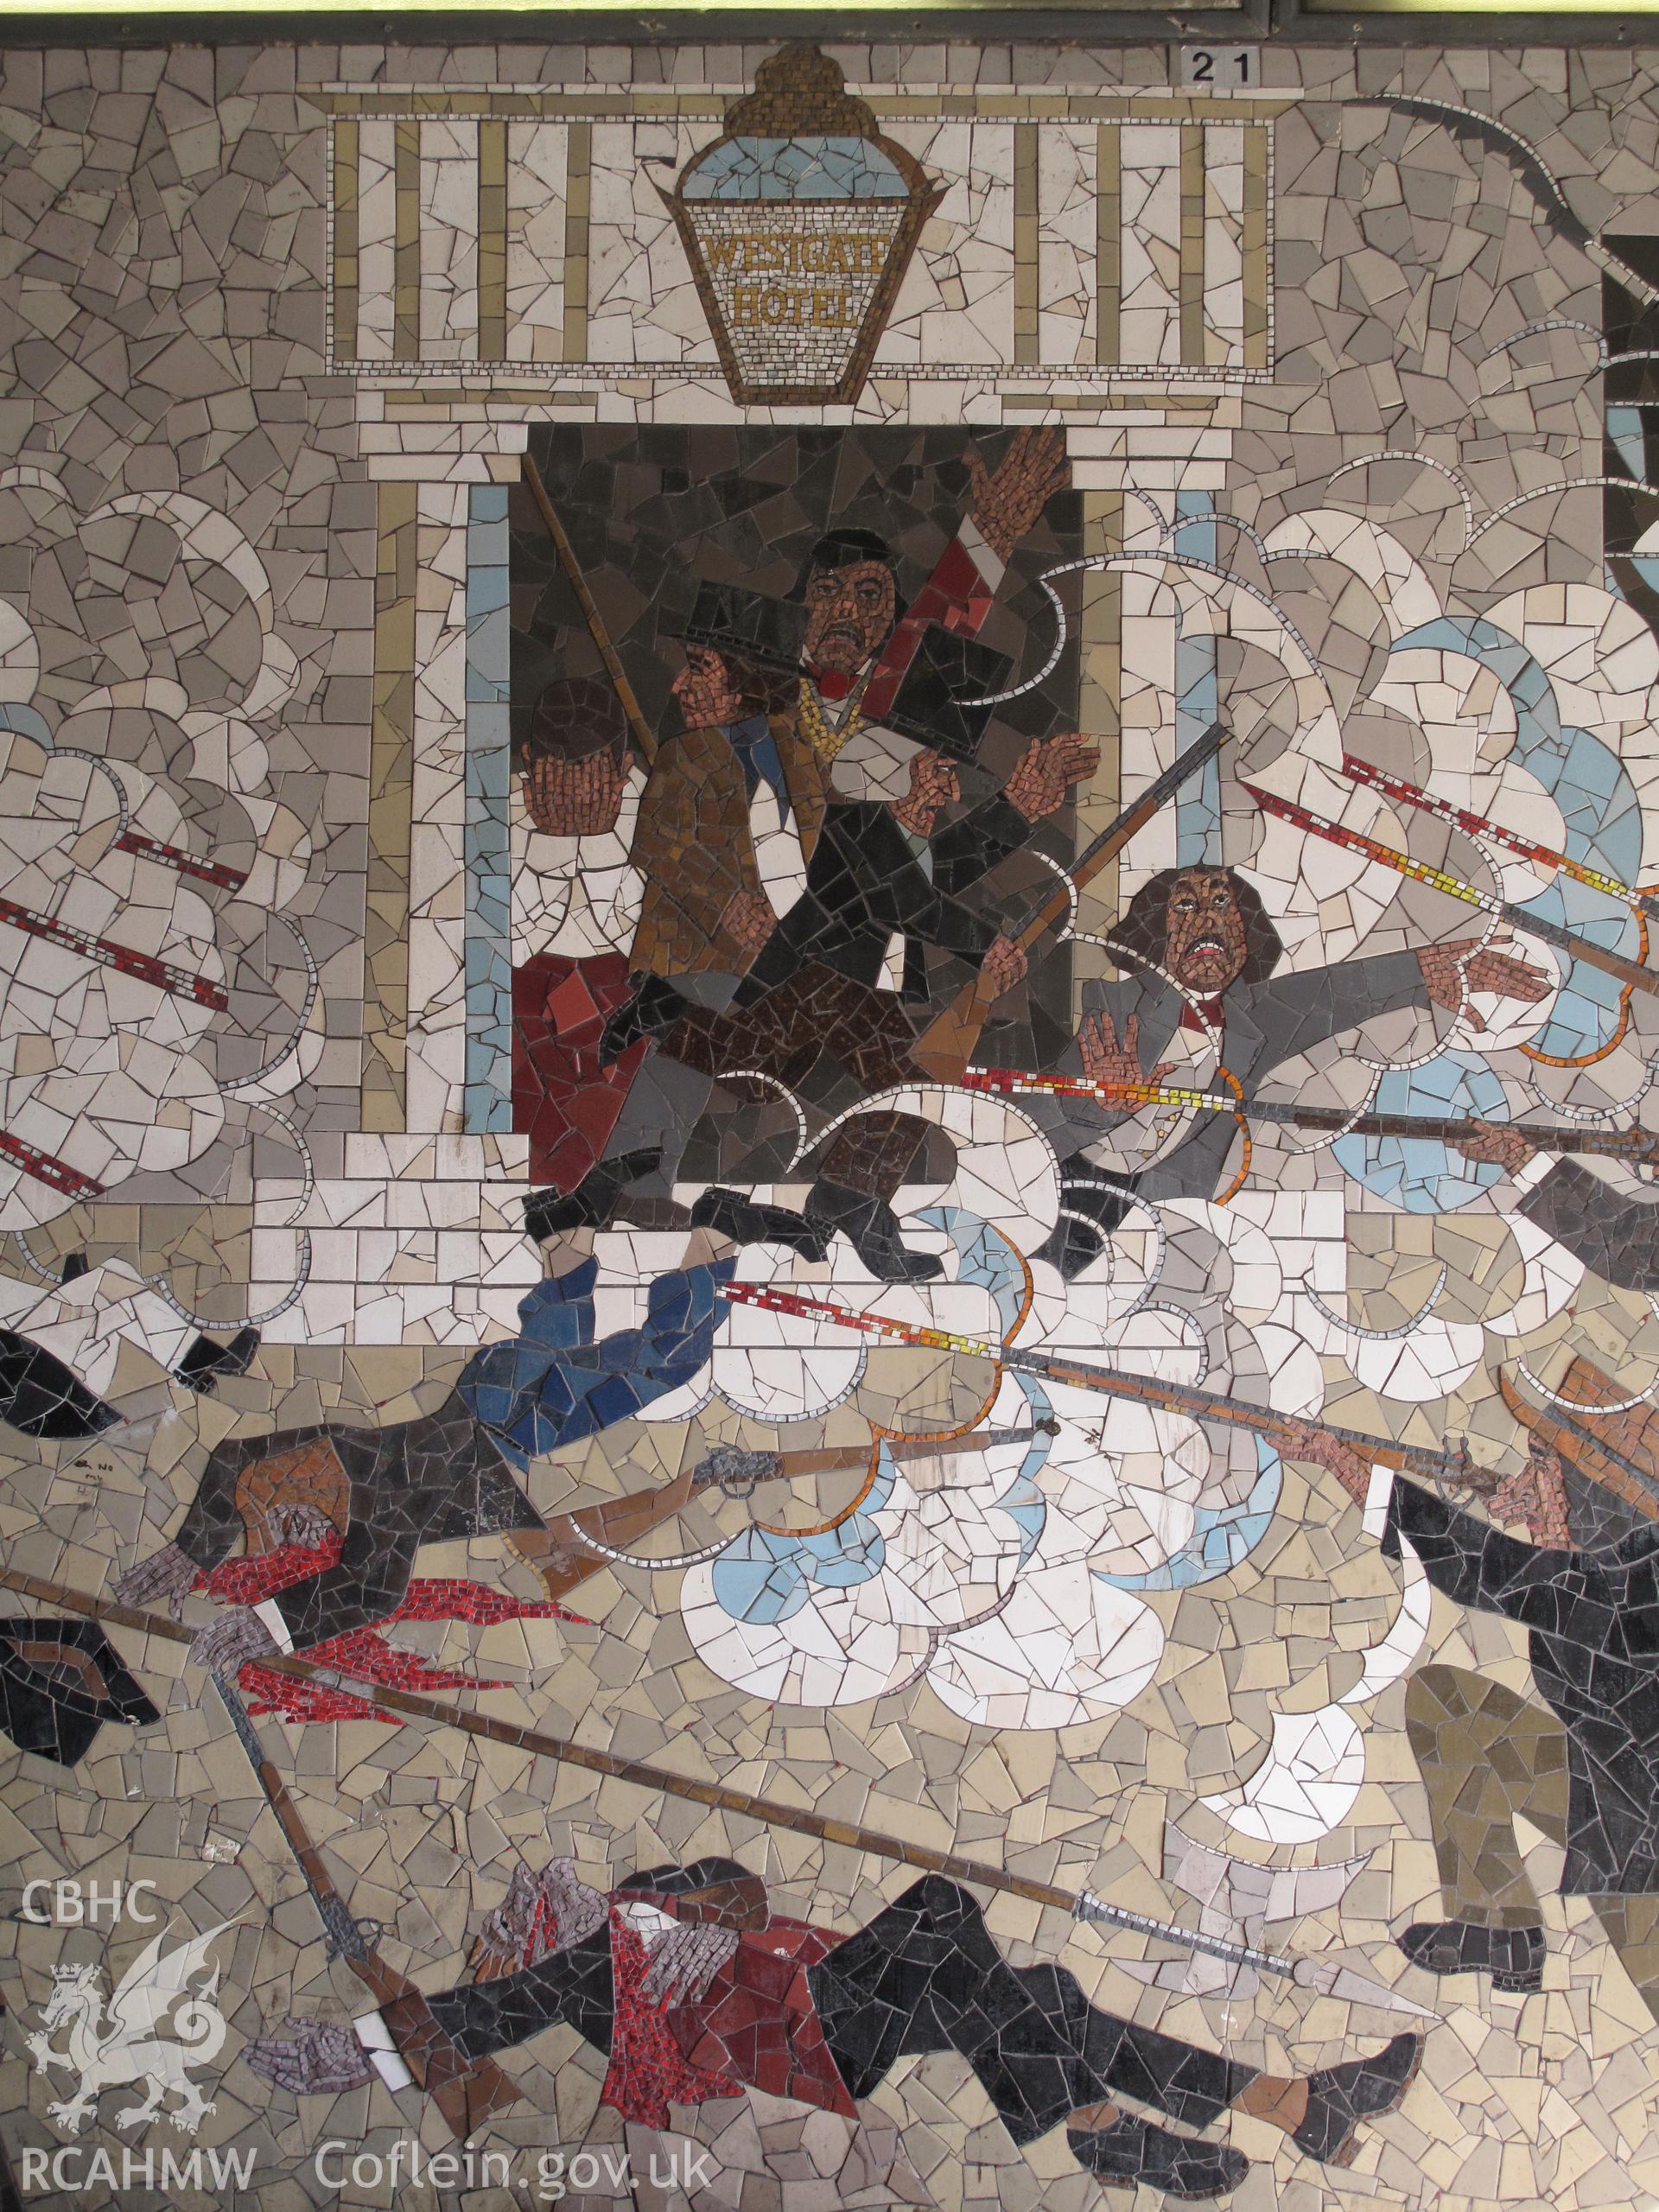 Detail of Chartist Uprising Mural, Newport, taken by Brian Malaws on 01 March 2010.